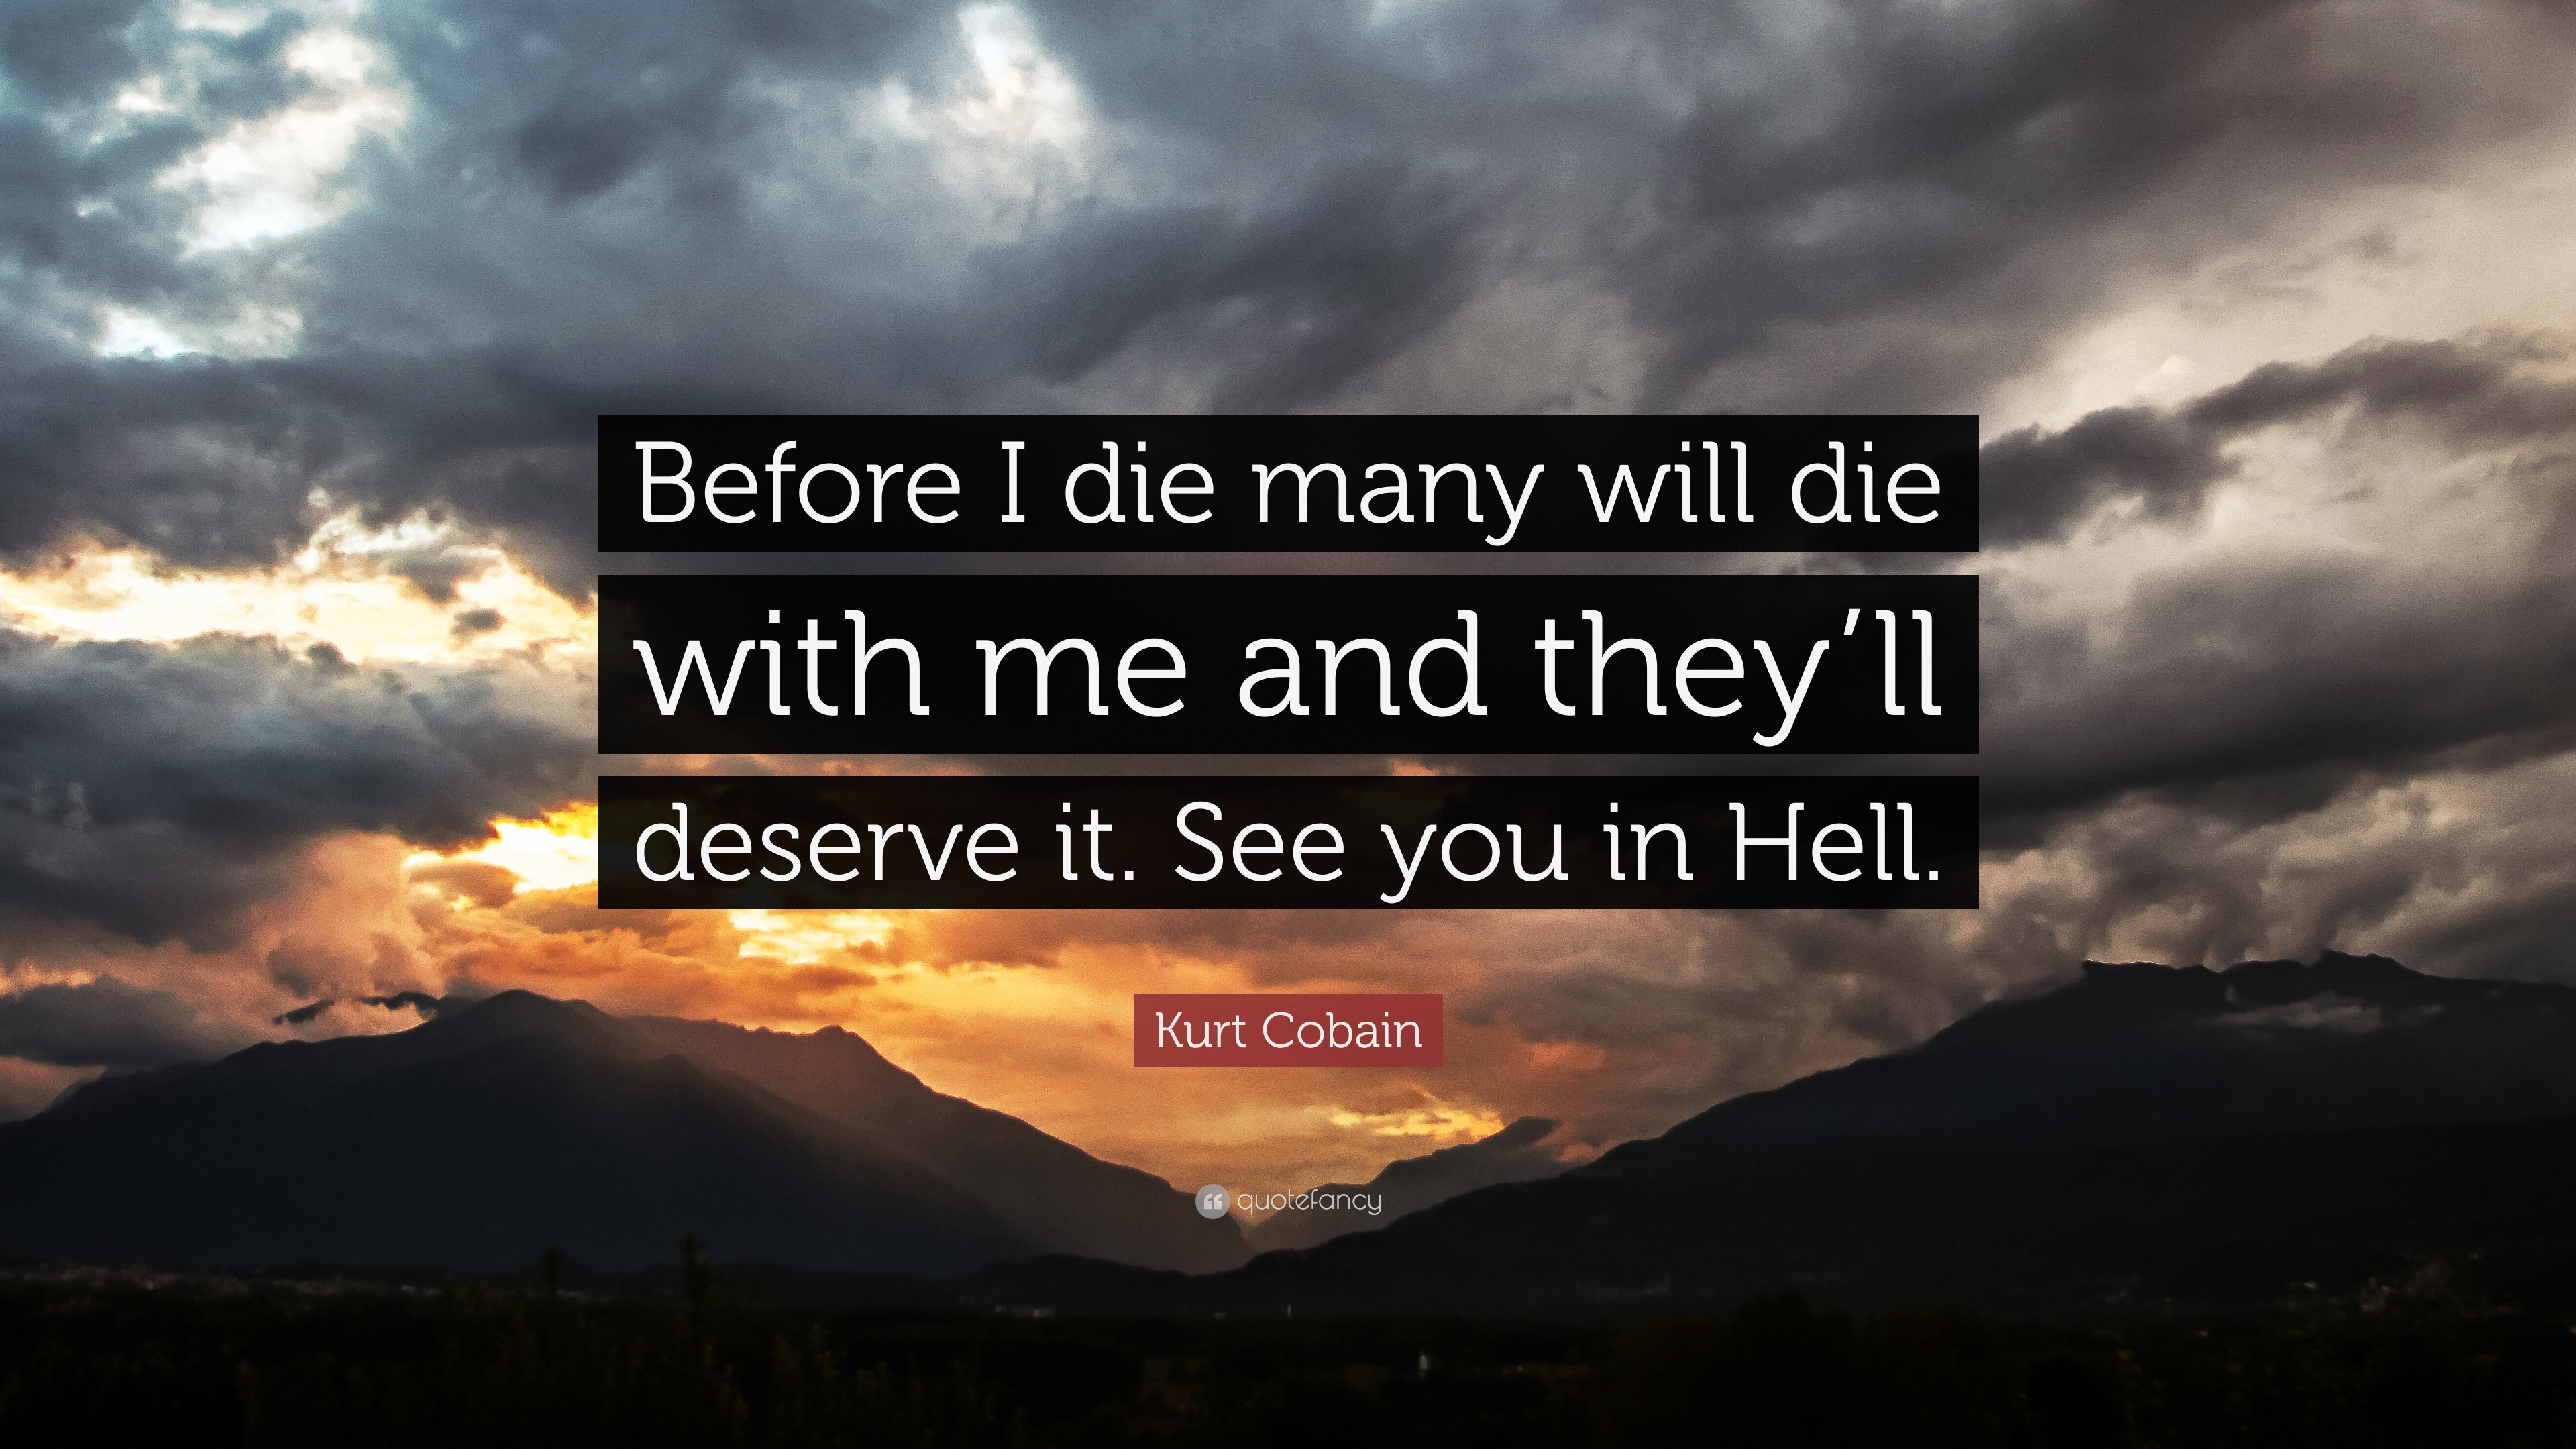 Kurt Cobain Quote: “Before I die many will die with me and they’ll ...